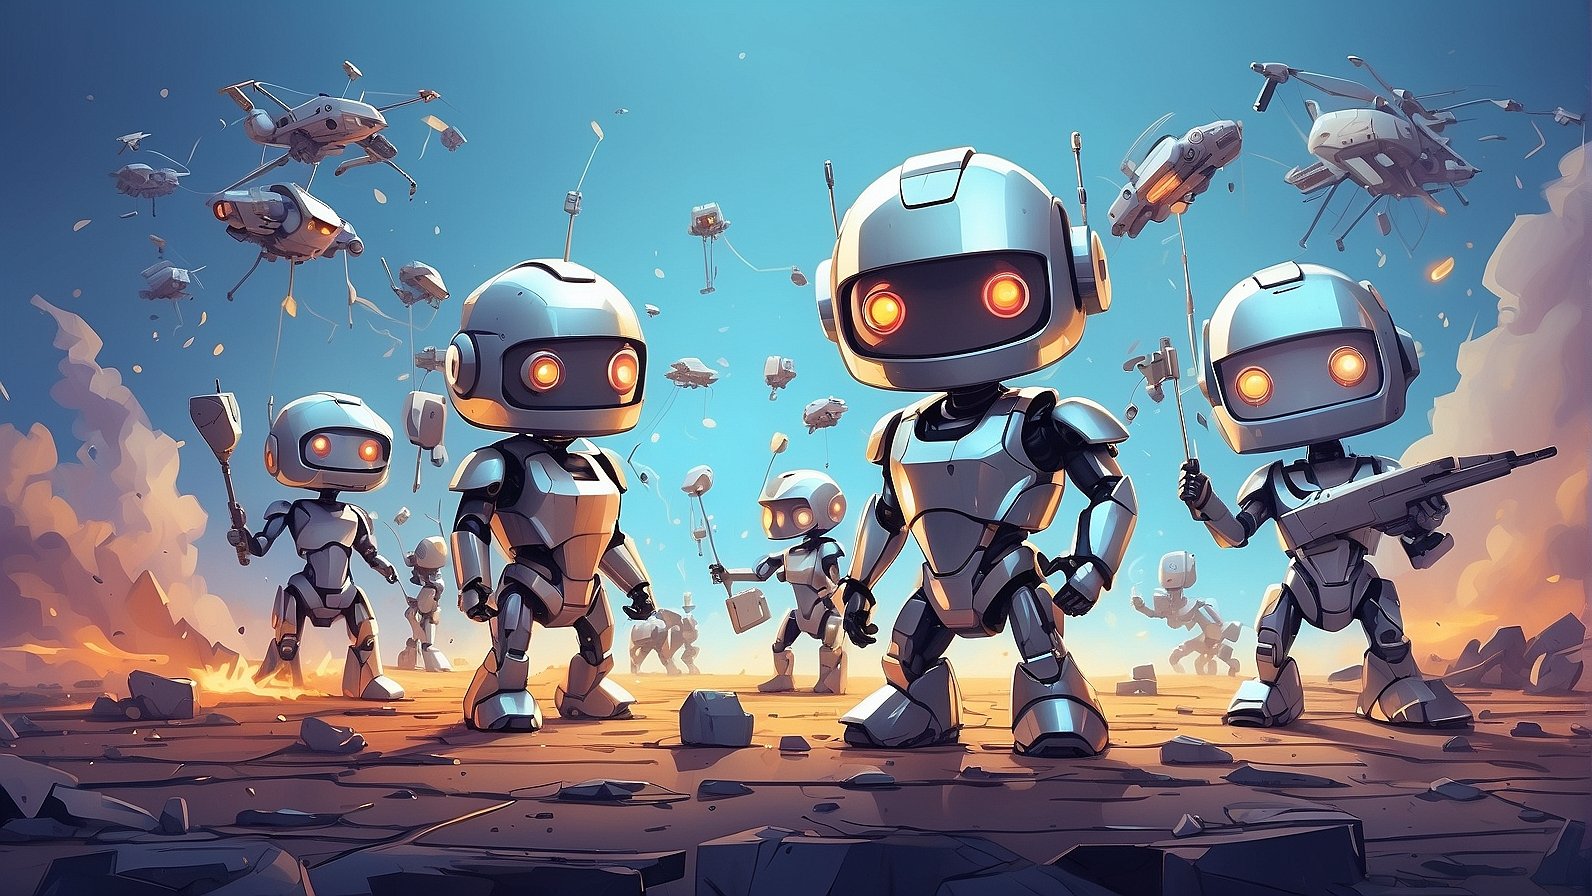 Picture a stylized battlefield within a social media app interface. AI agents, depicted as small robots or digital avatars, are actively countering hate speech missiles with shields of factual information and positive messages.